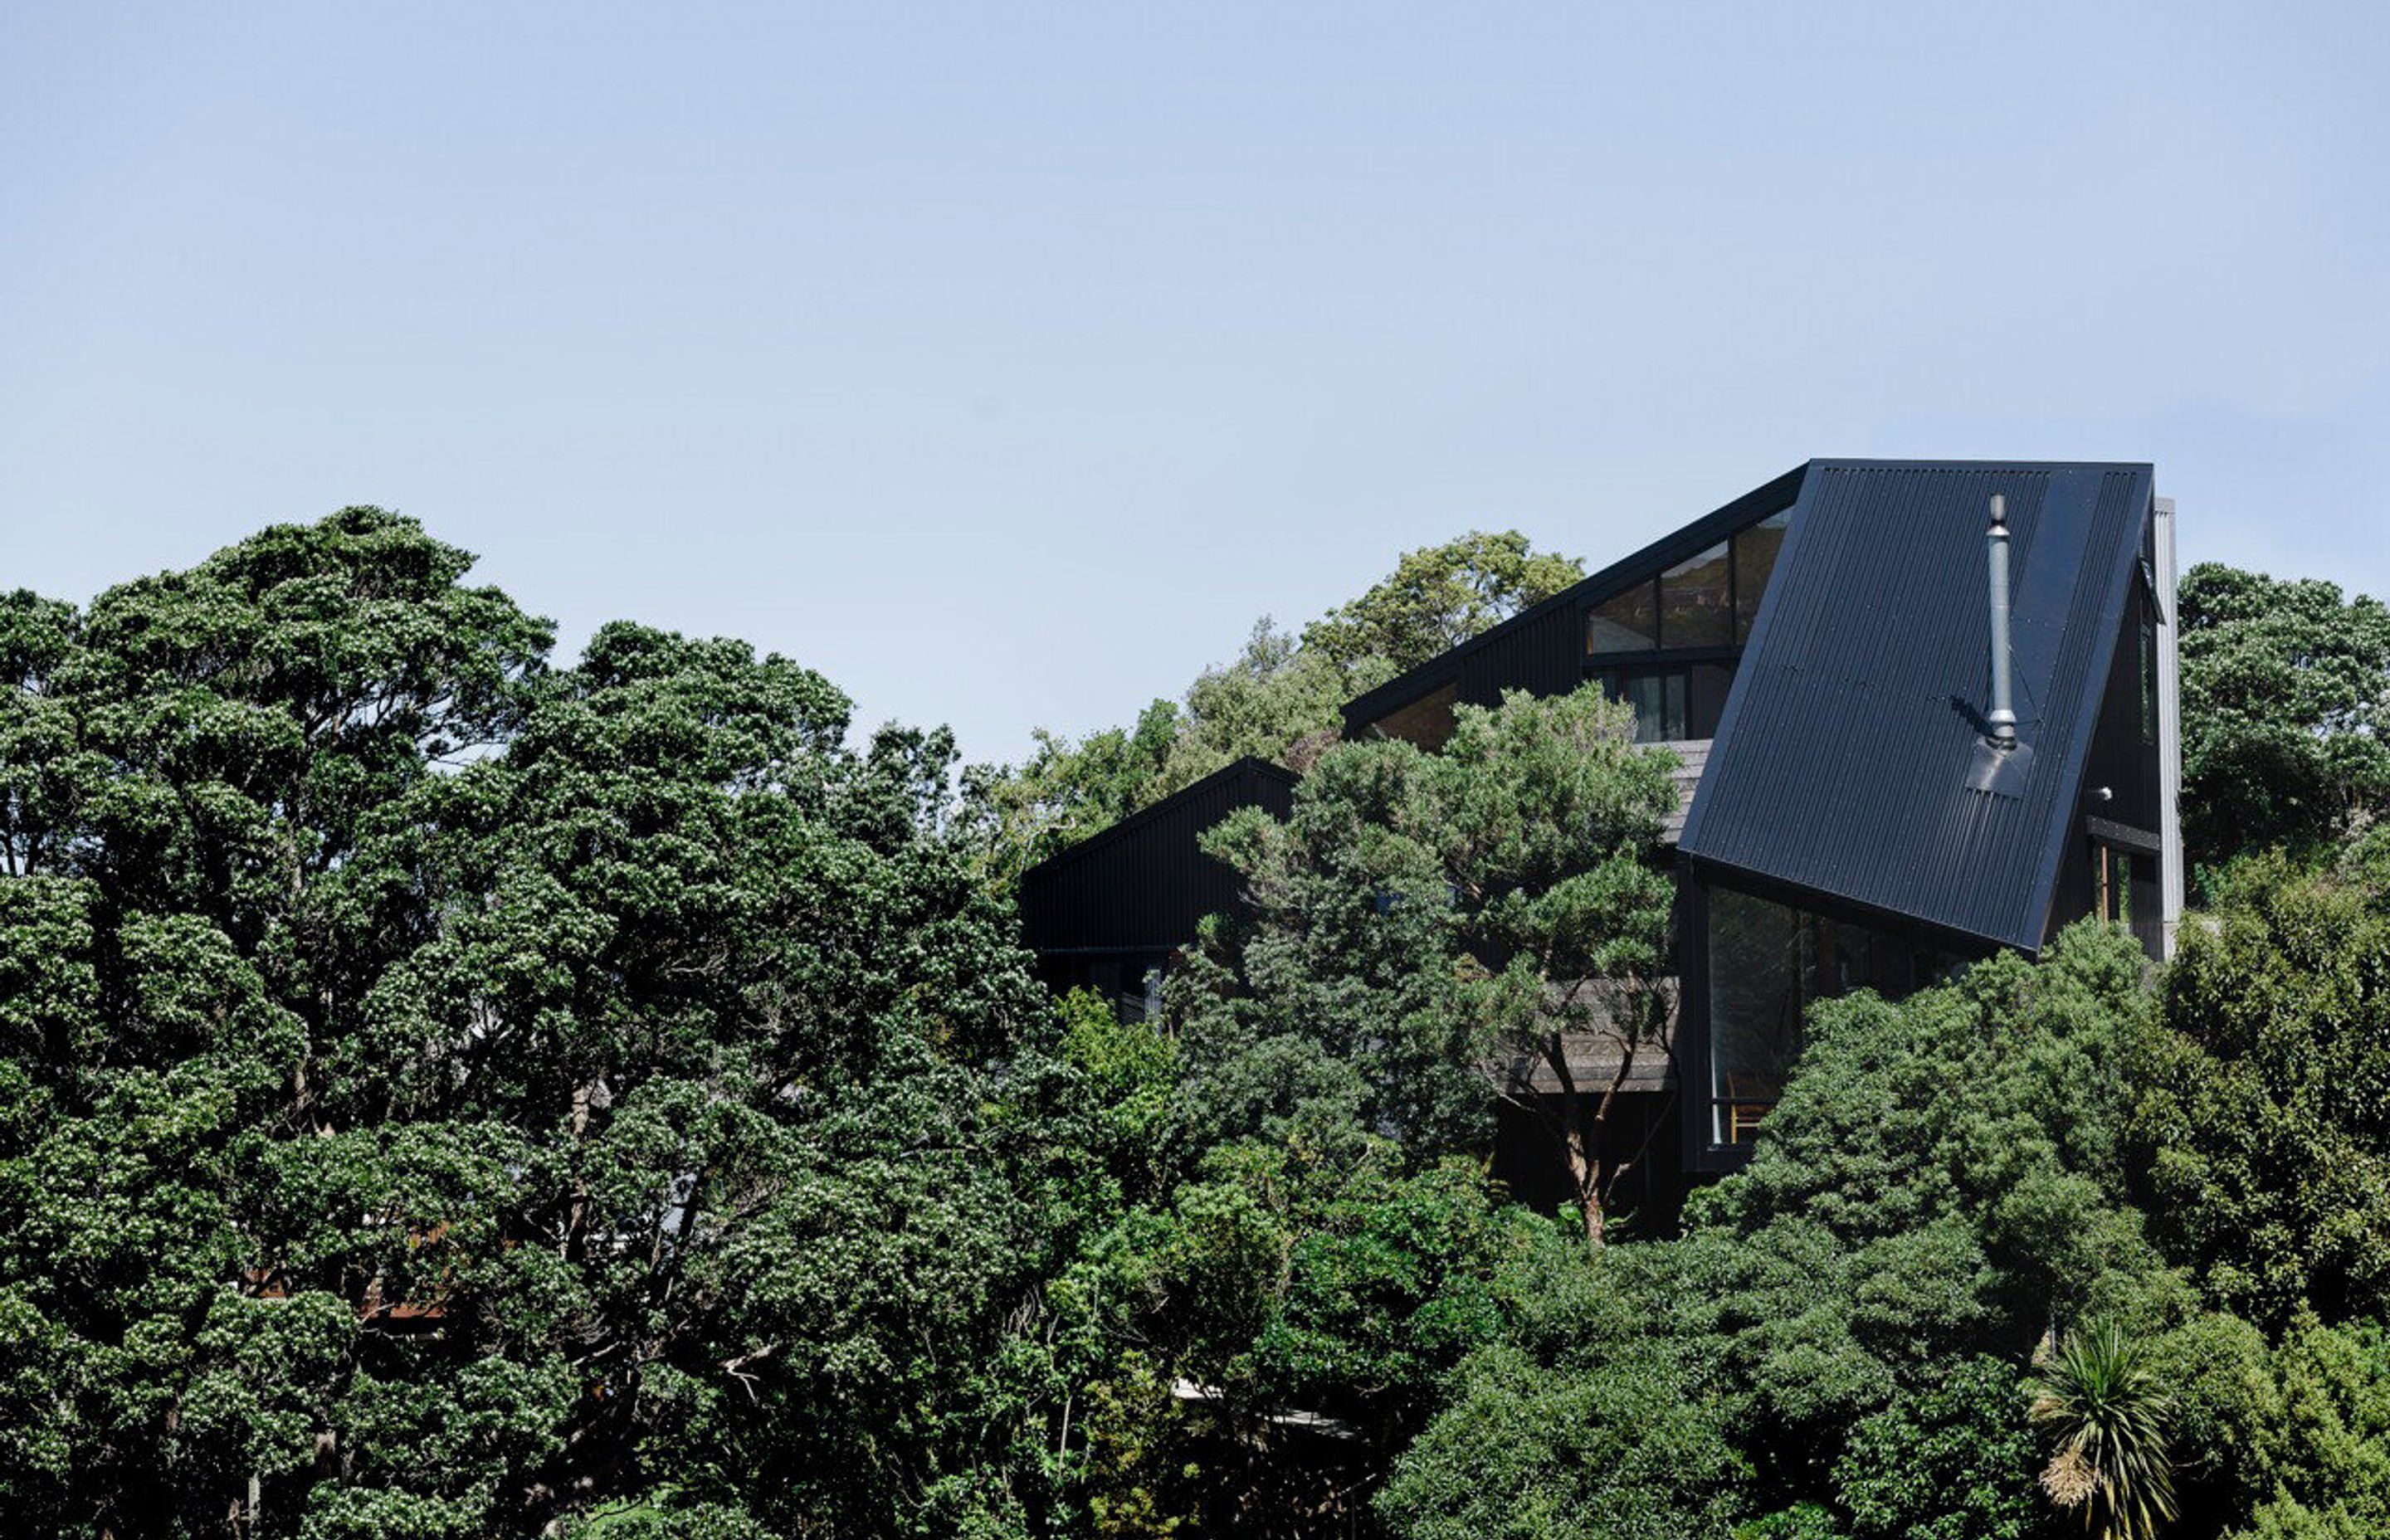 A home set amongst native trees on a steep site with challenging access, Stealth Bomber was designed by Patchwork Architecture and built by Dorset Construction.